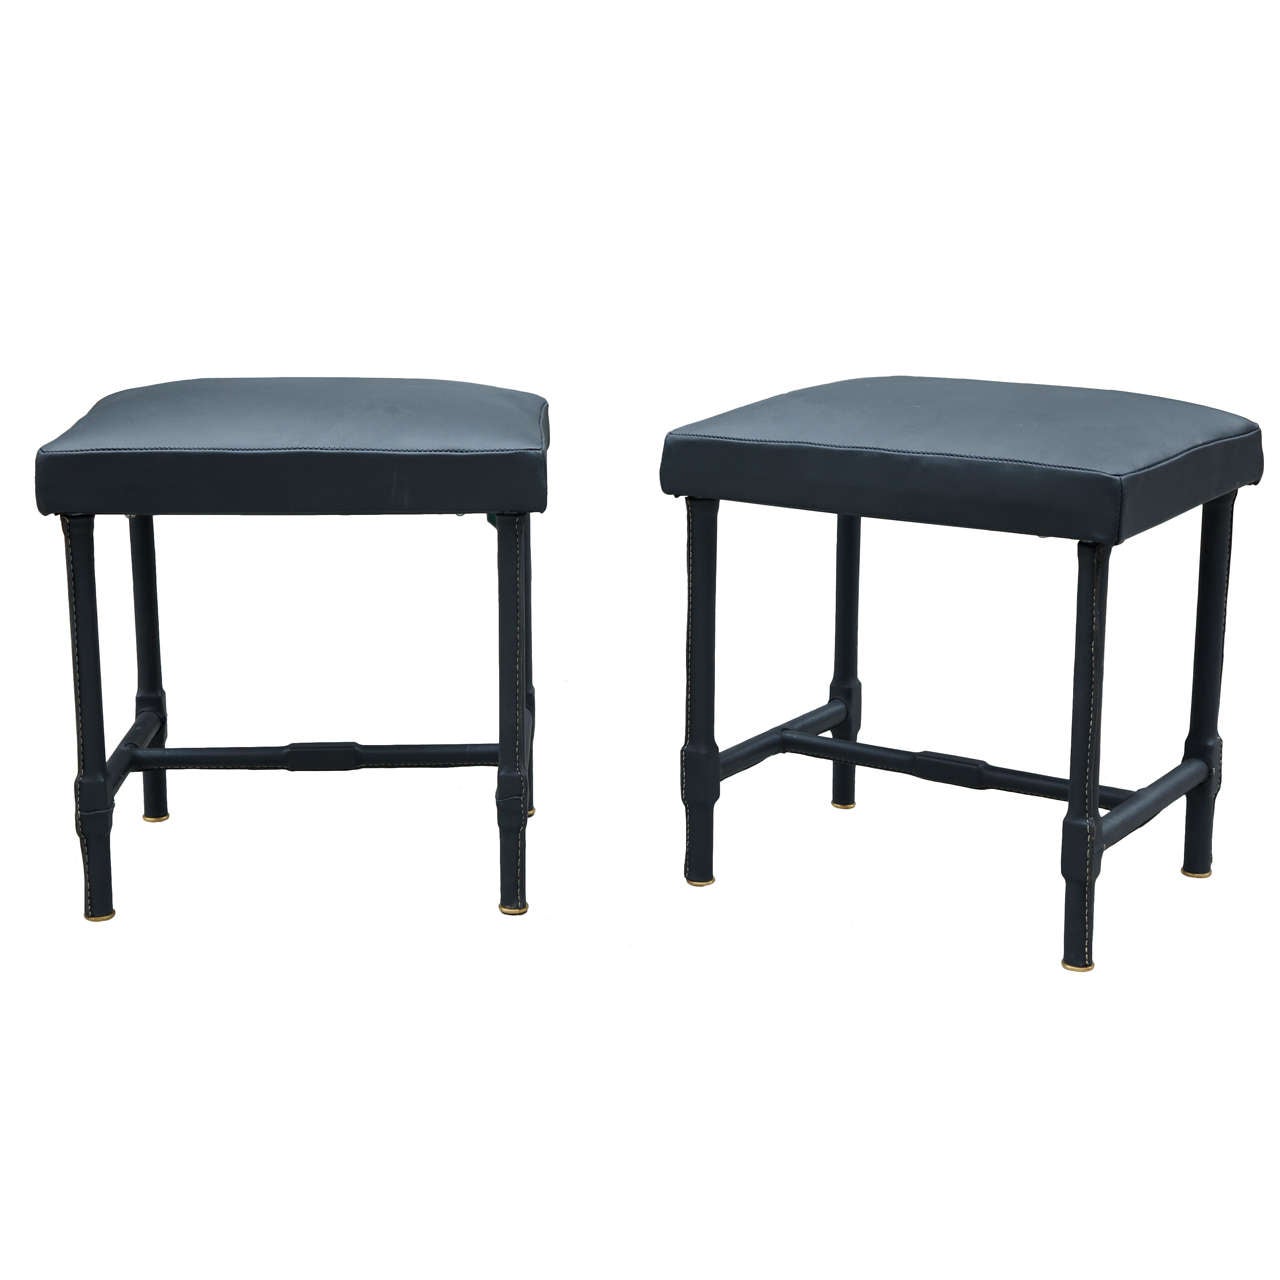 Jacques Adnet 1950's stools